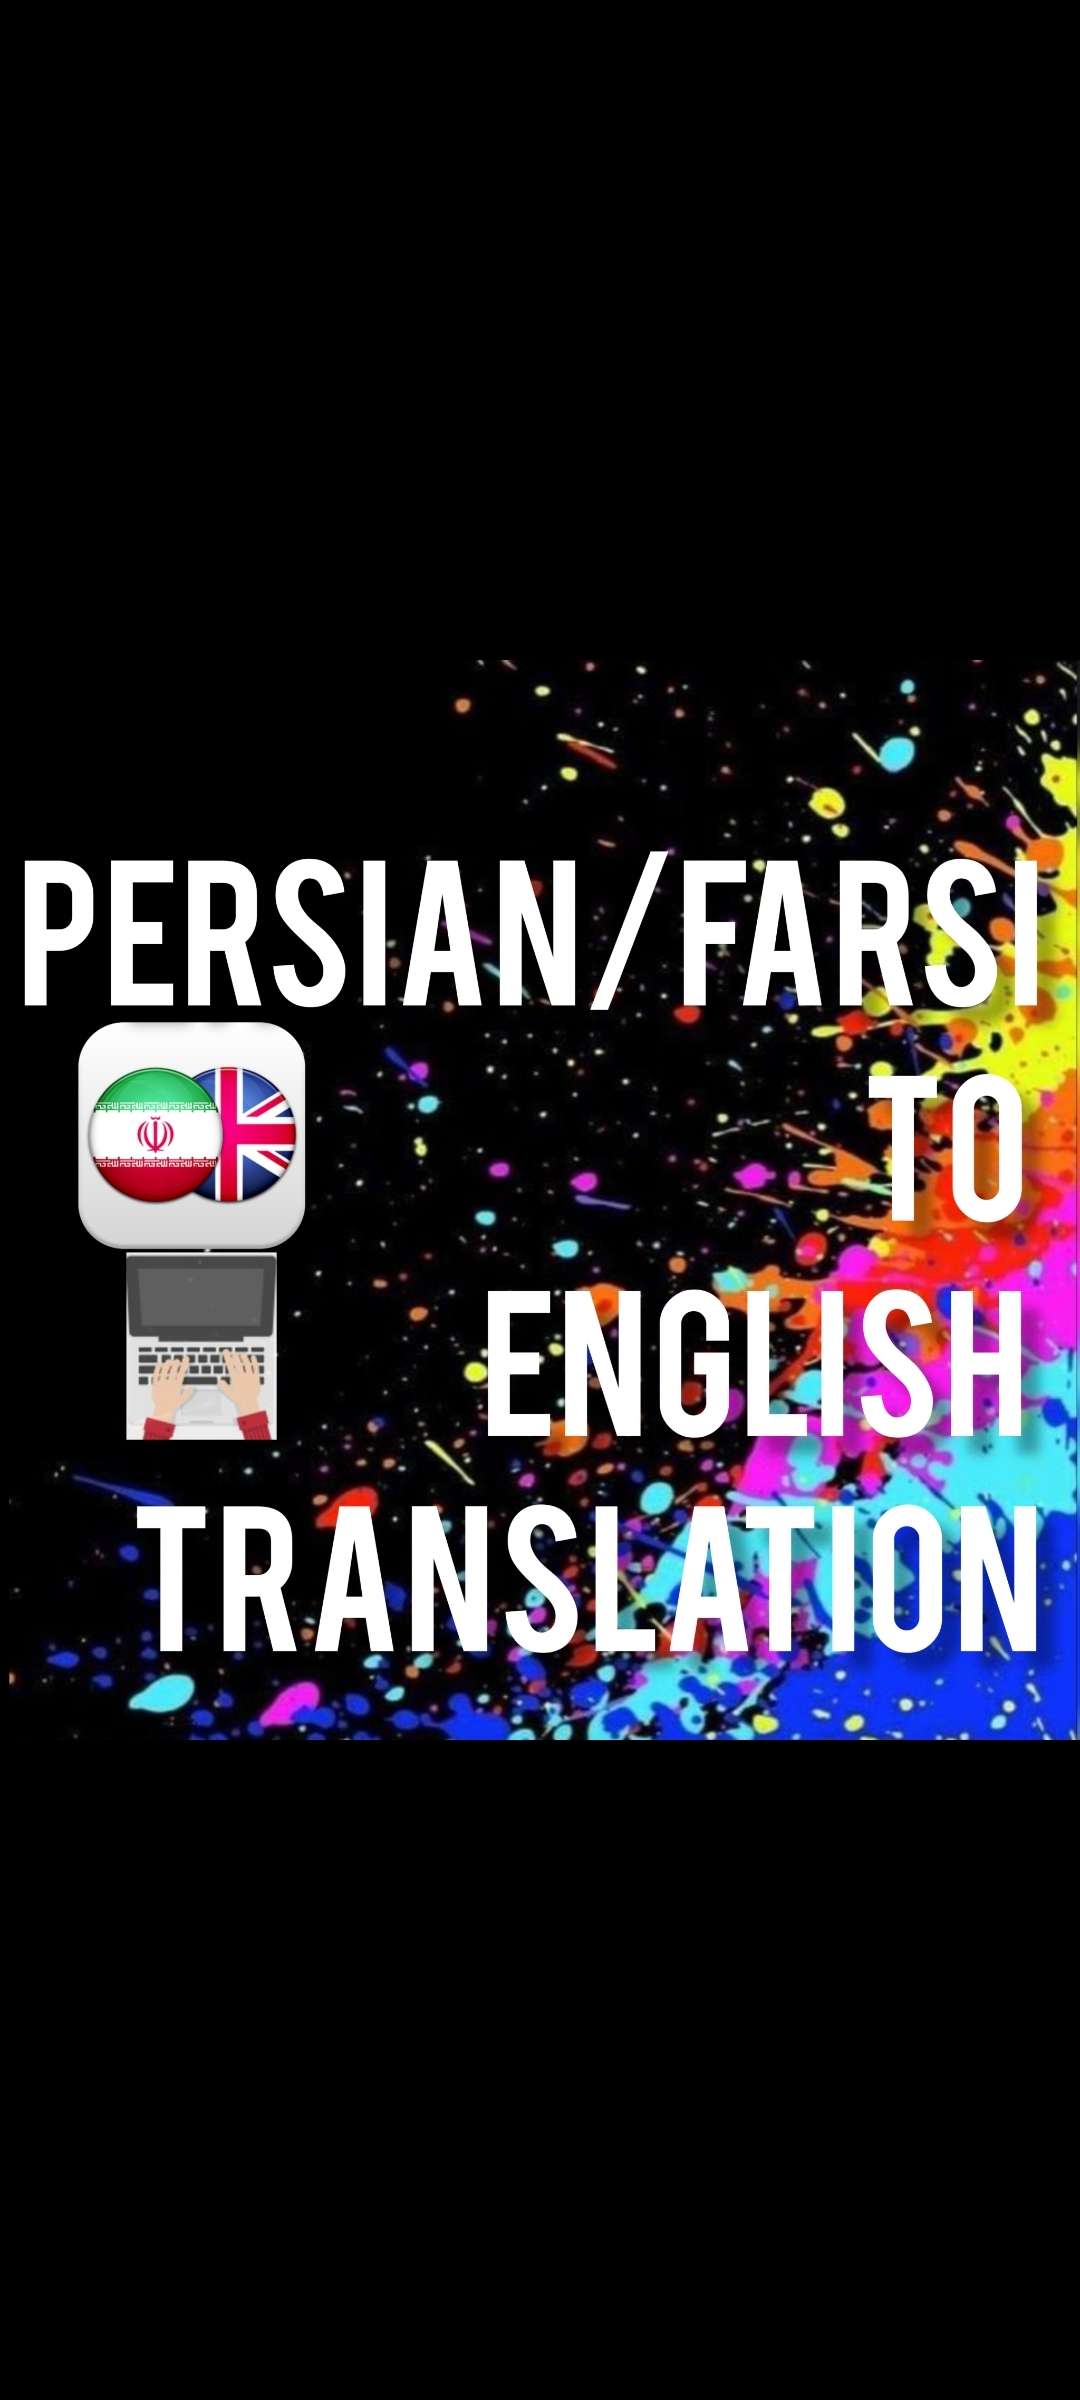 Text and text translation services